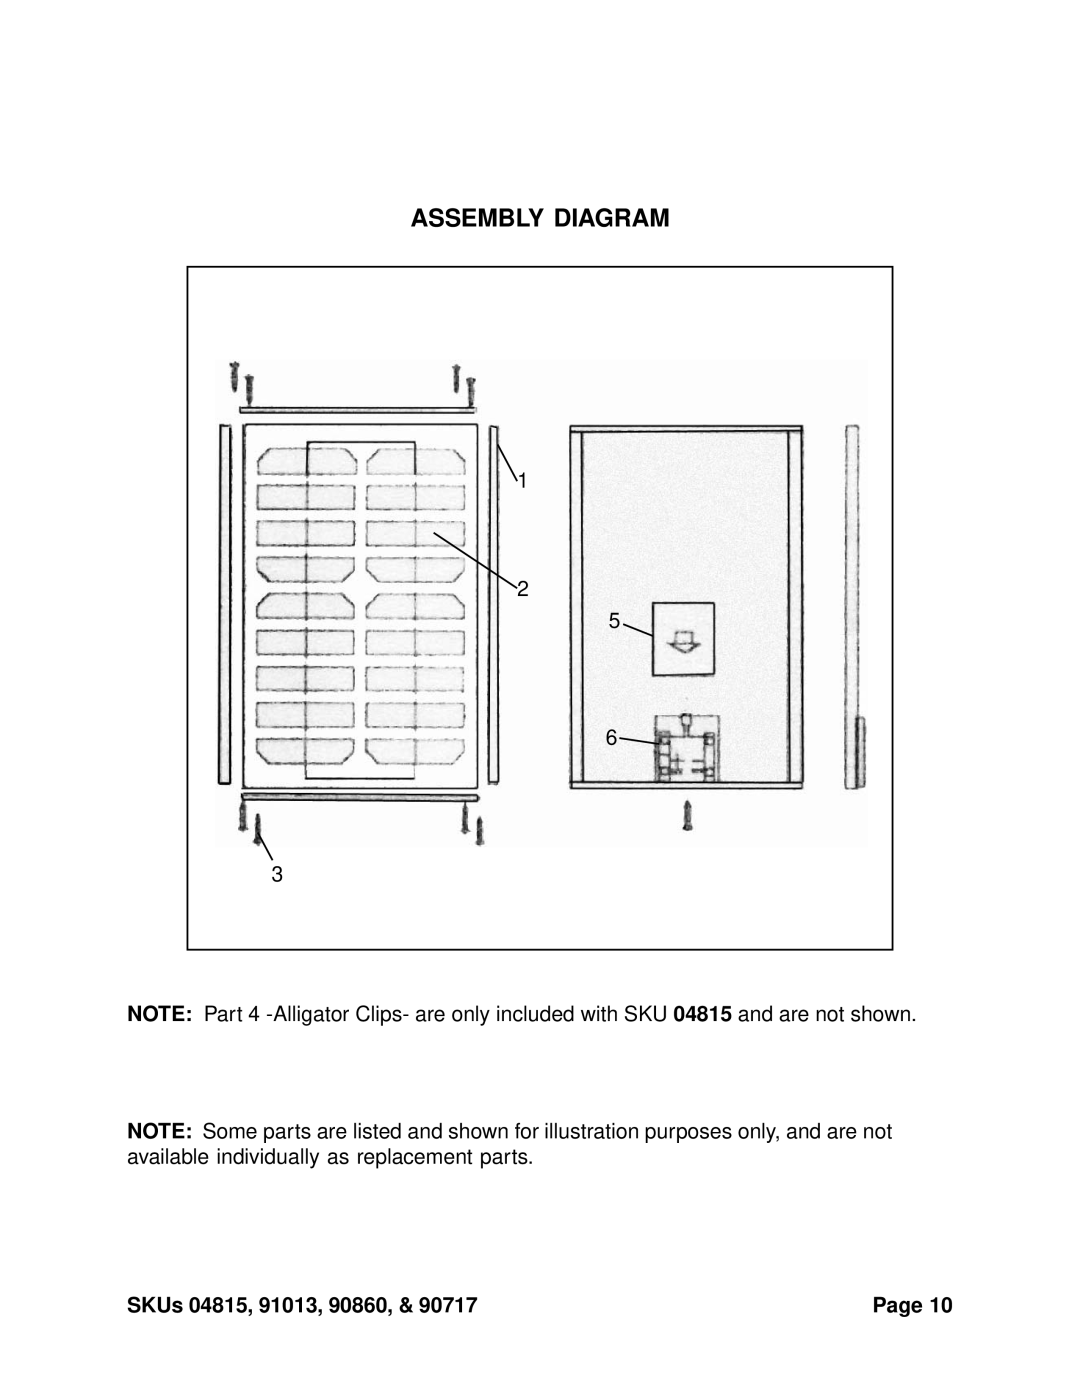 Harbor Freight Tools 90717, 90860, 91013, 4815 manual Assembly Diagram 